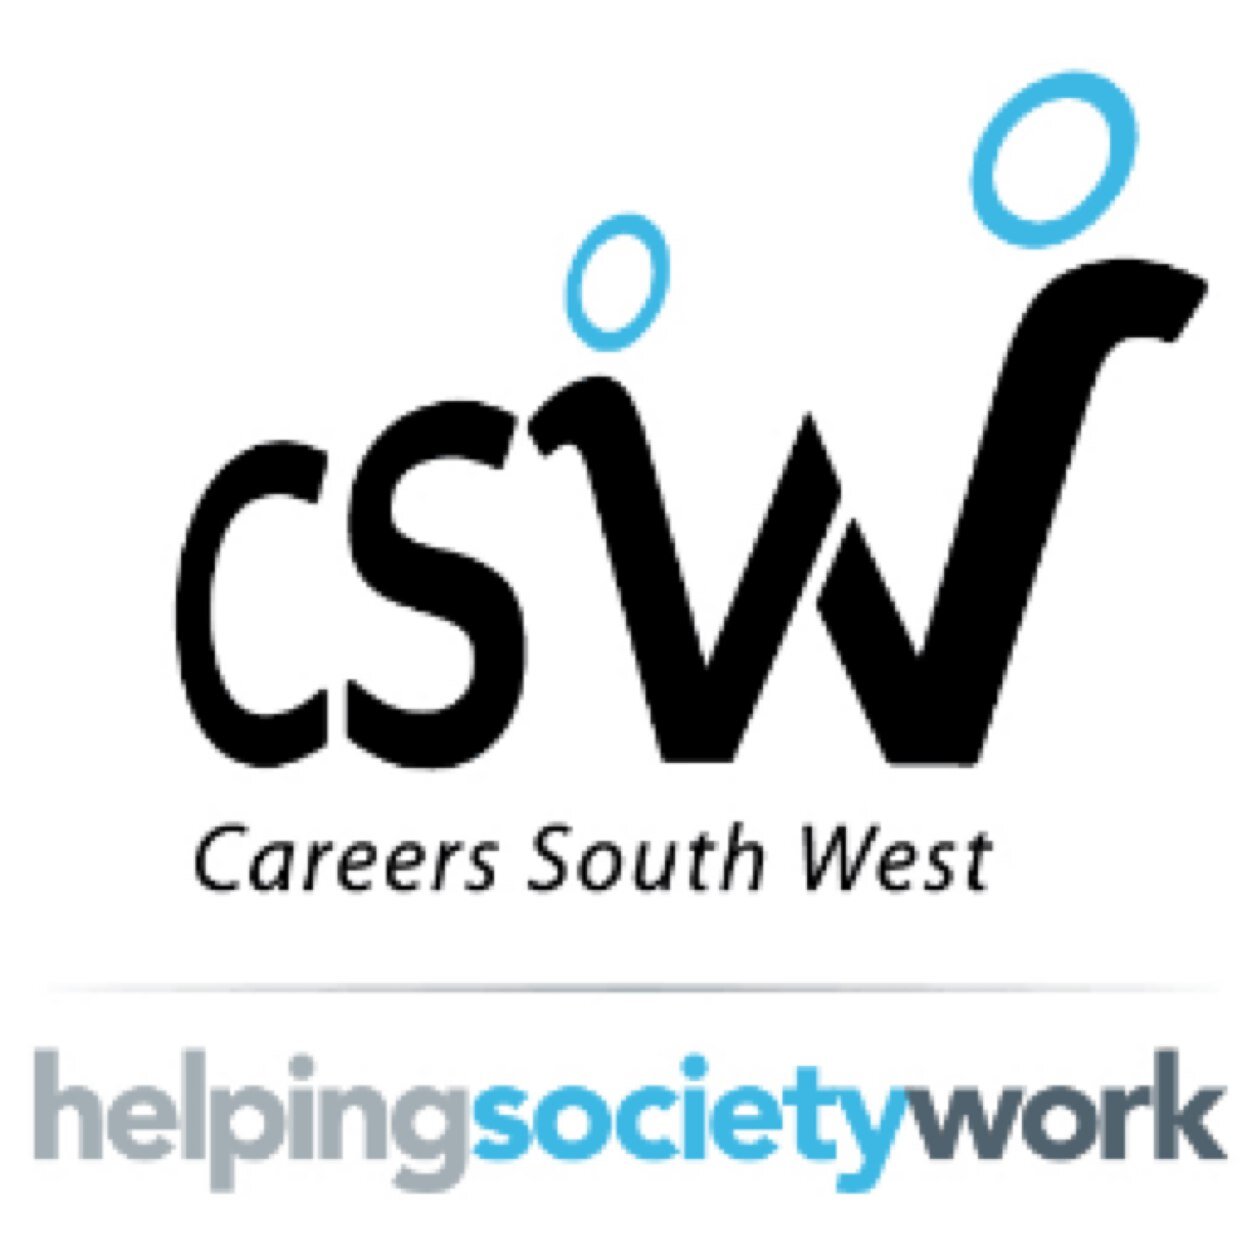 CSW provide impartial information, advice & guidance to schools, employers & individuals. 
01392 203603 
https://t.co/tFRYodhVDu